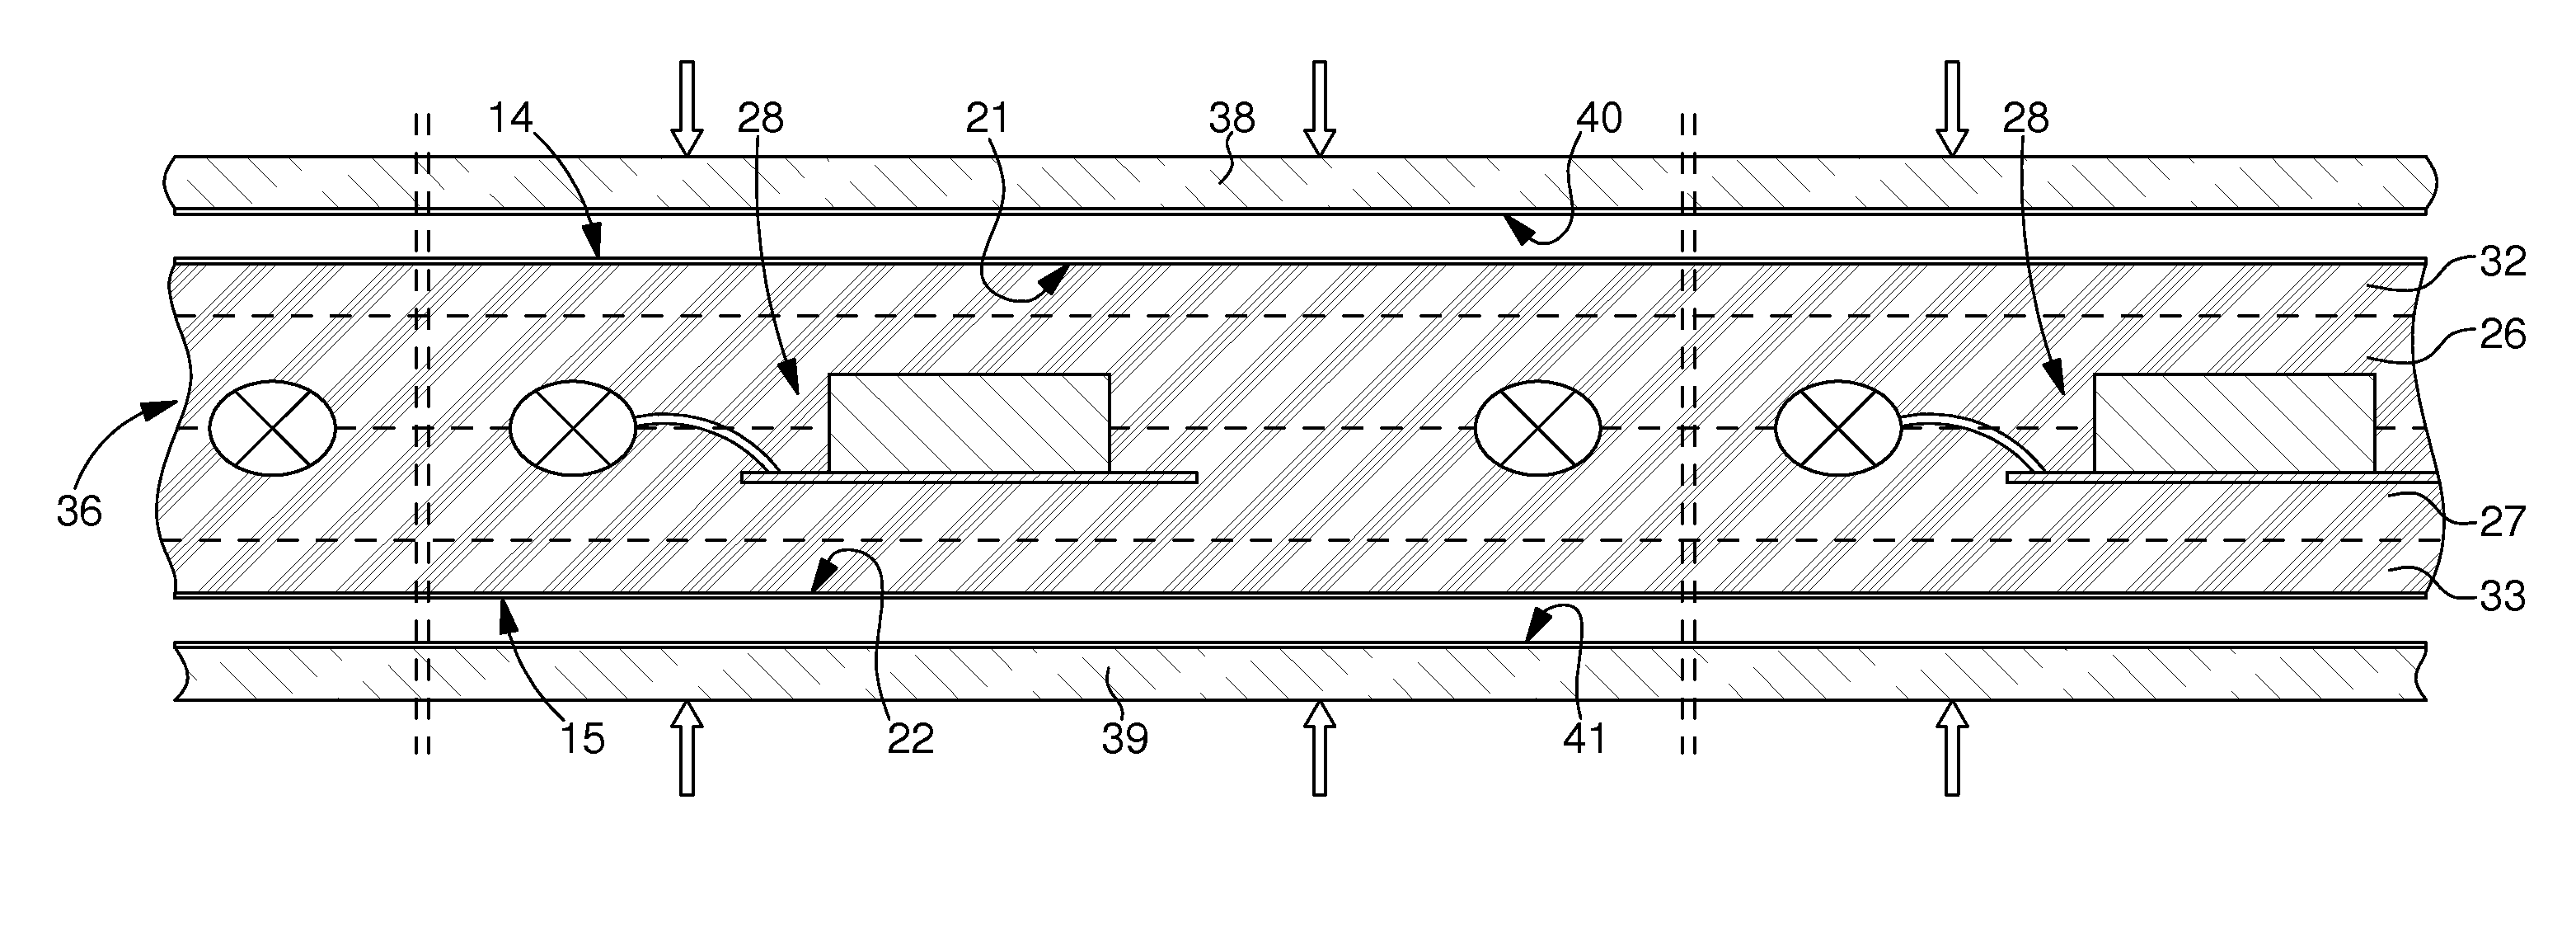 Method of fabricating electronic cards including at least one printed pattern